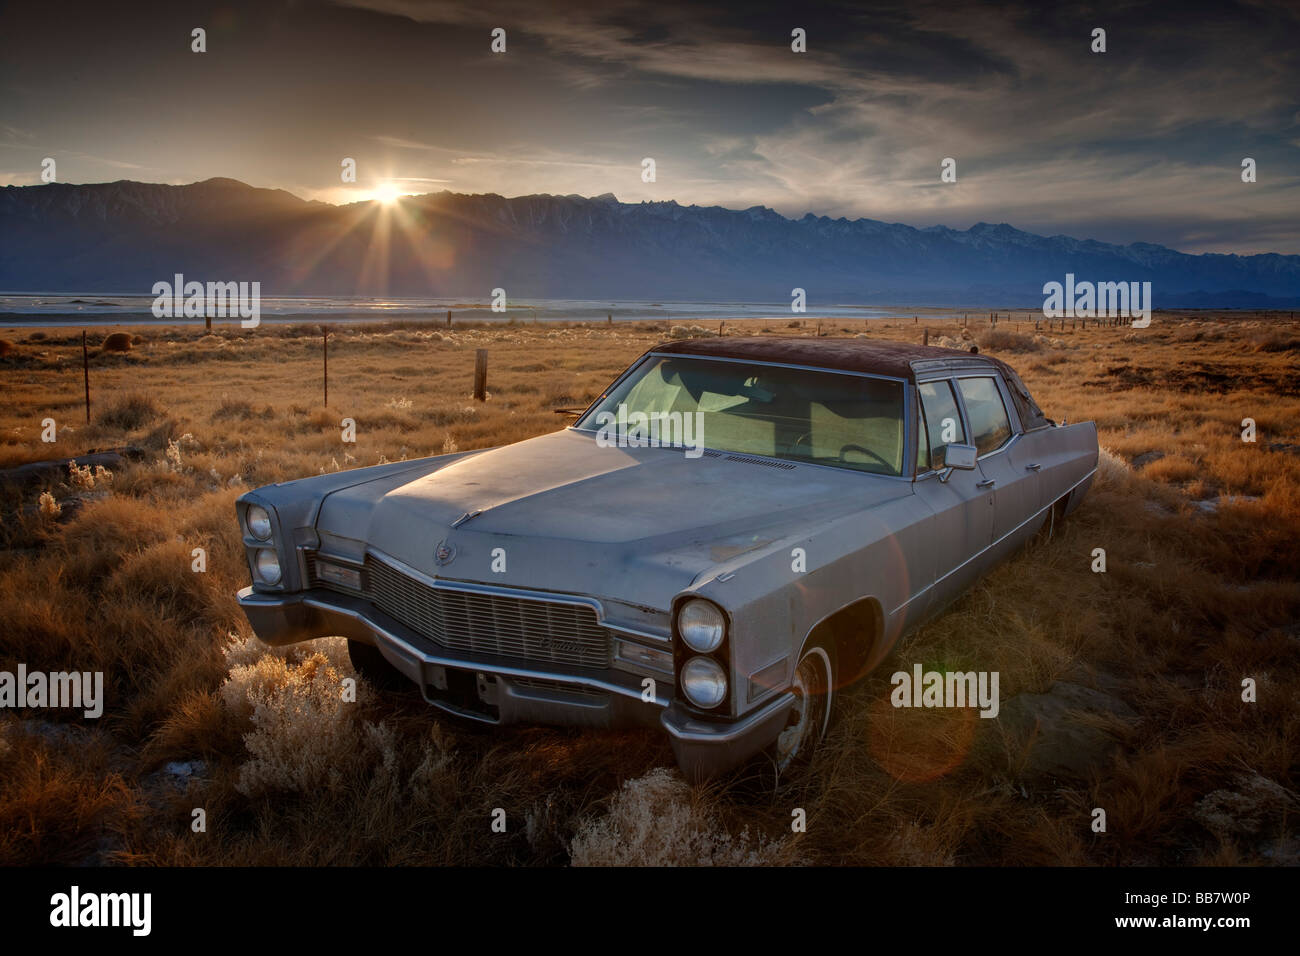 Abandoned Chevrolet automobile in field near Mount Whitney near Lone Pine in California USA Stock Photo